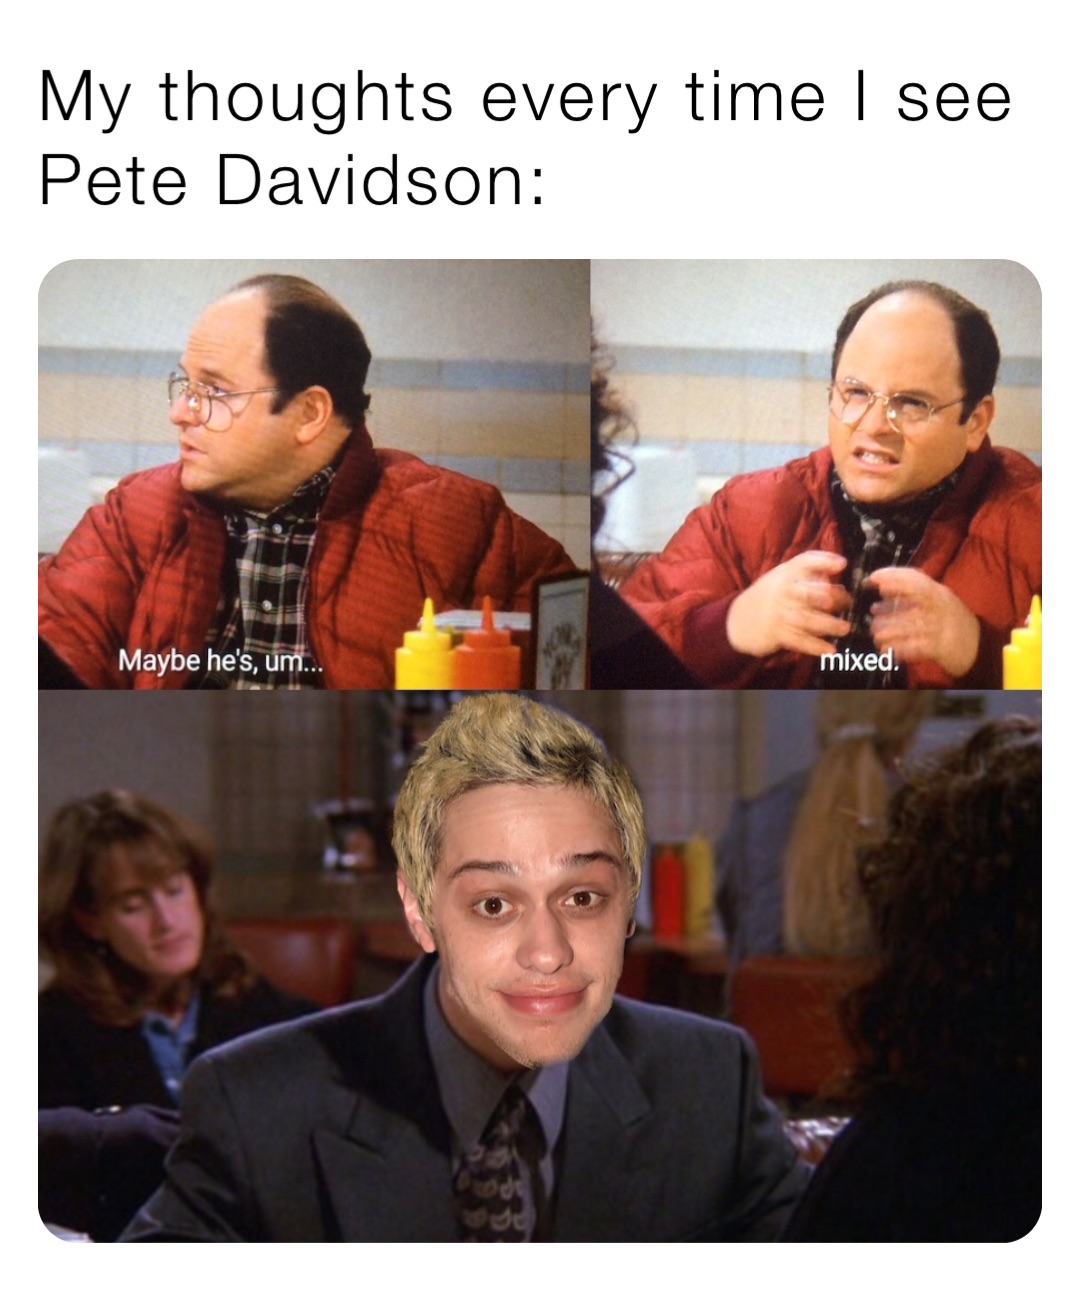 My thoughts every time I see Pete Davidson: